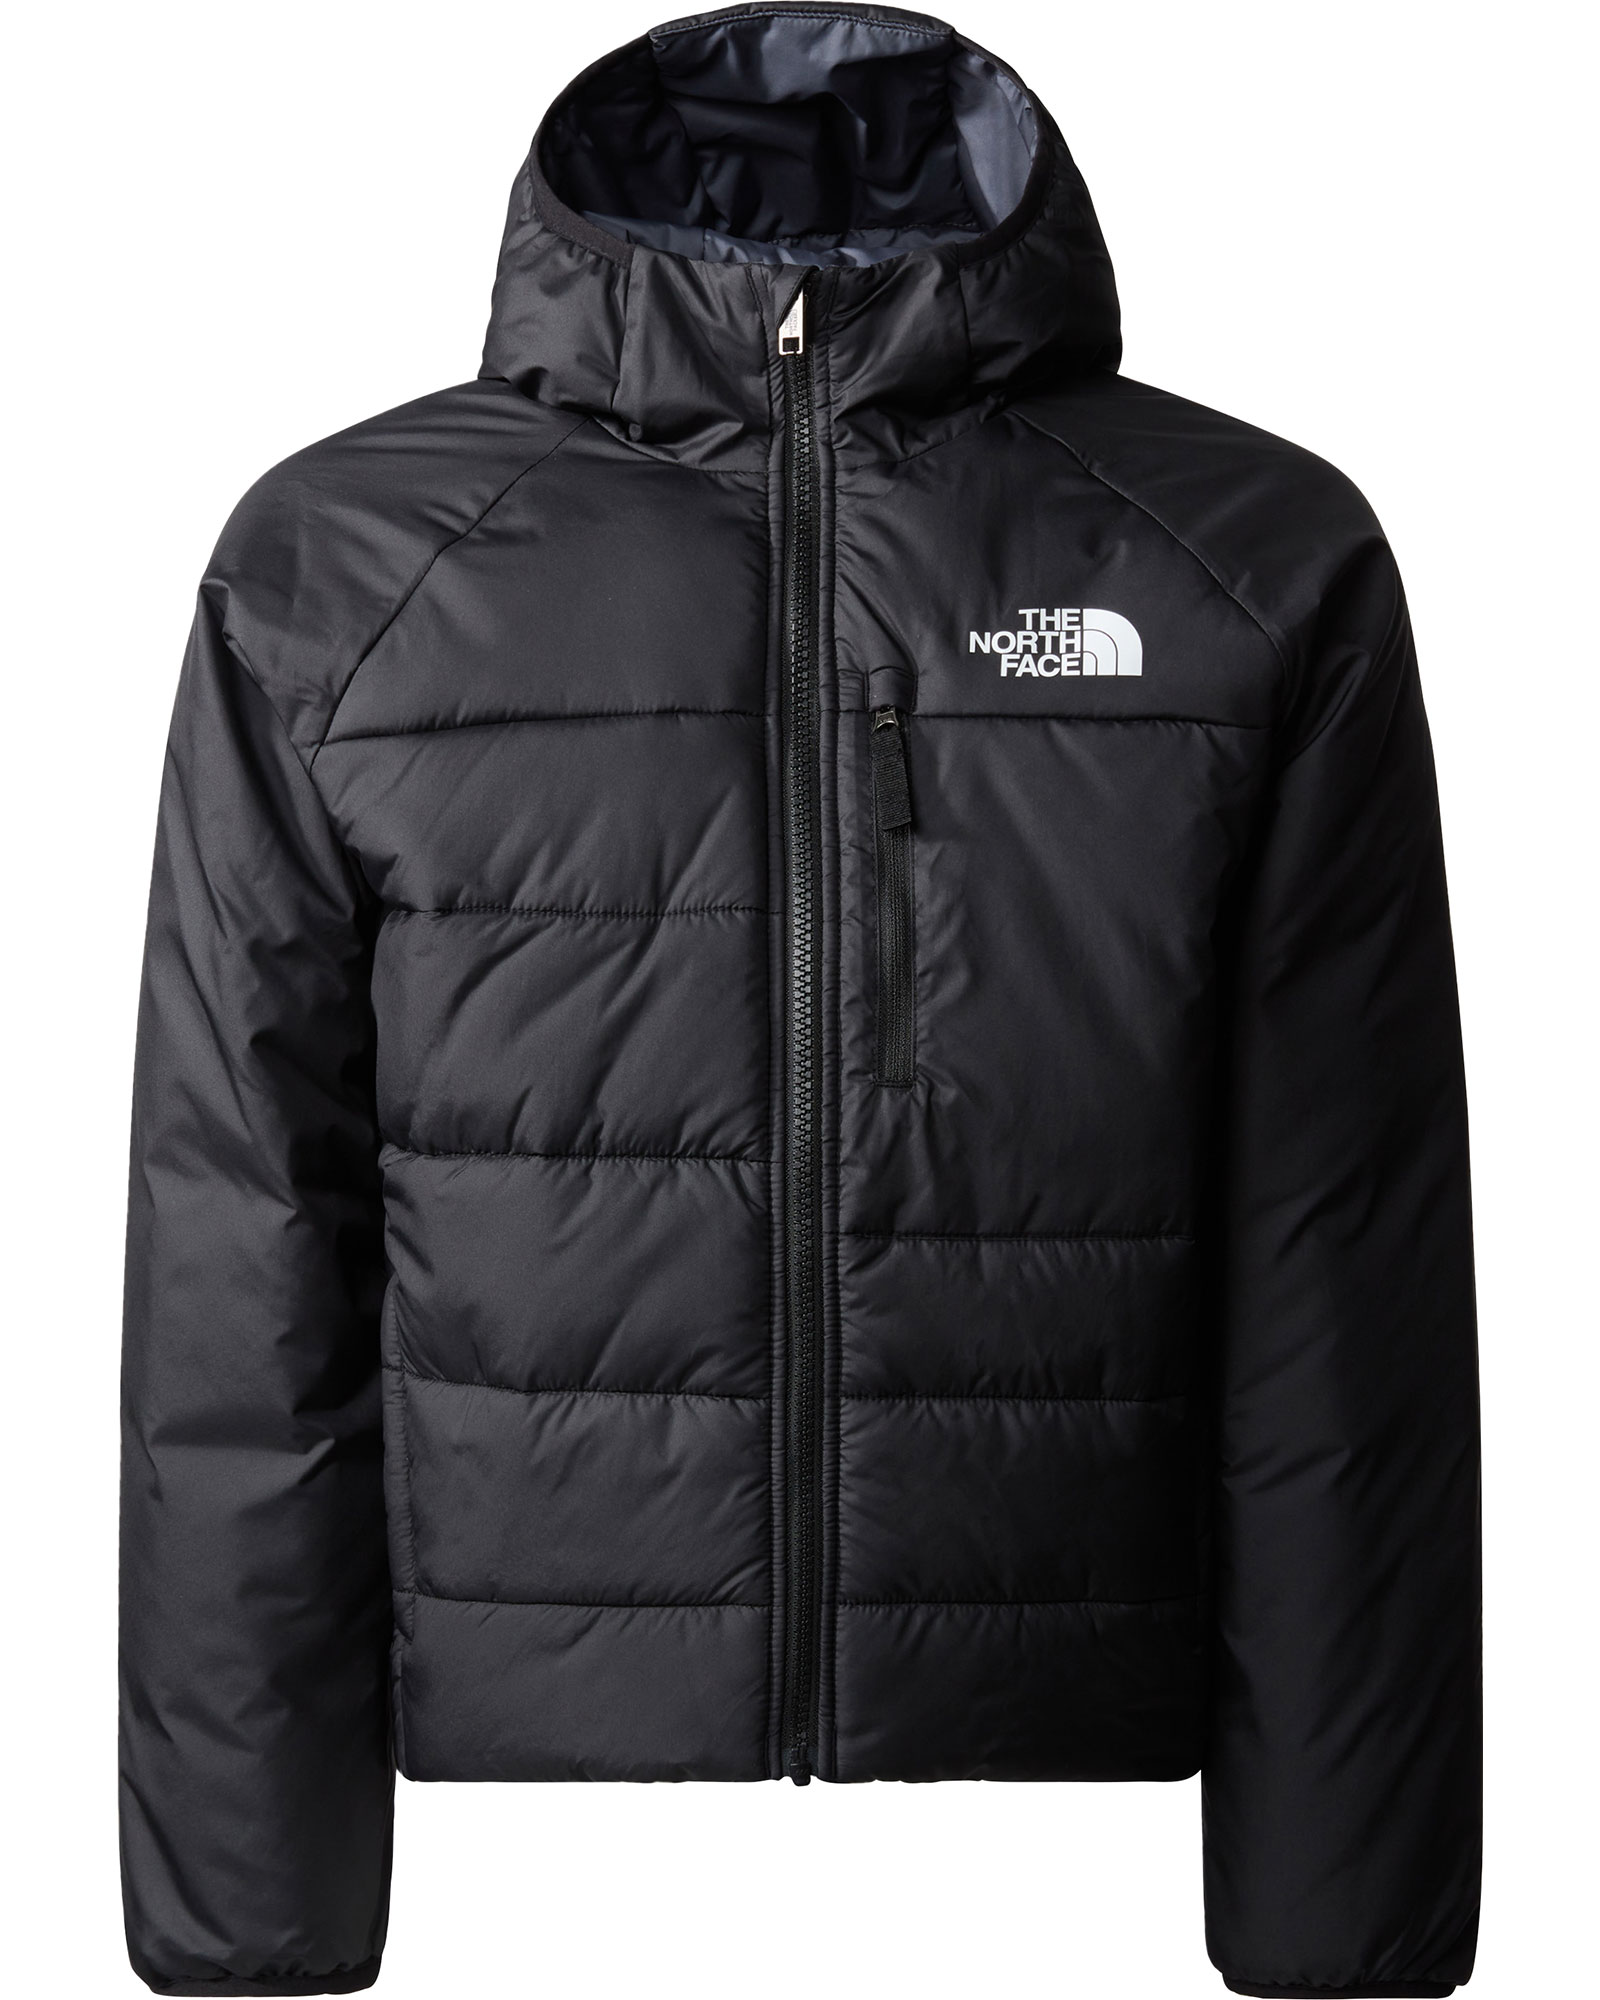 The North Face Boy's Reversible Perrito Insulated Jacket XL | Ellis Brigham